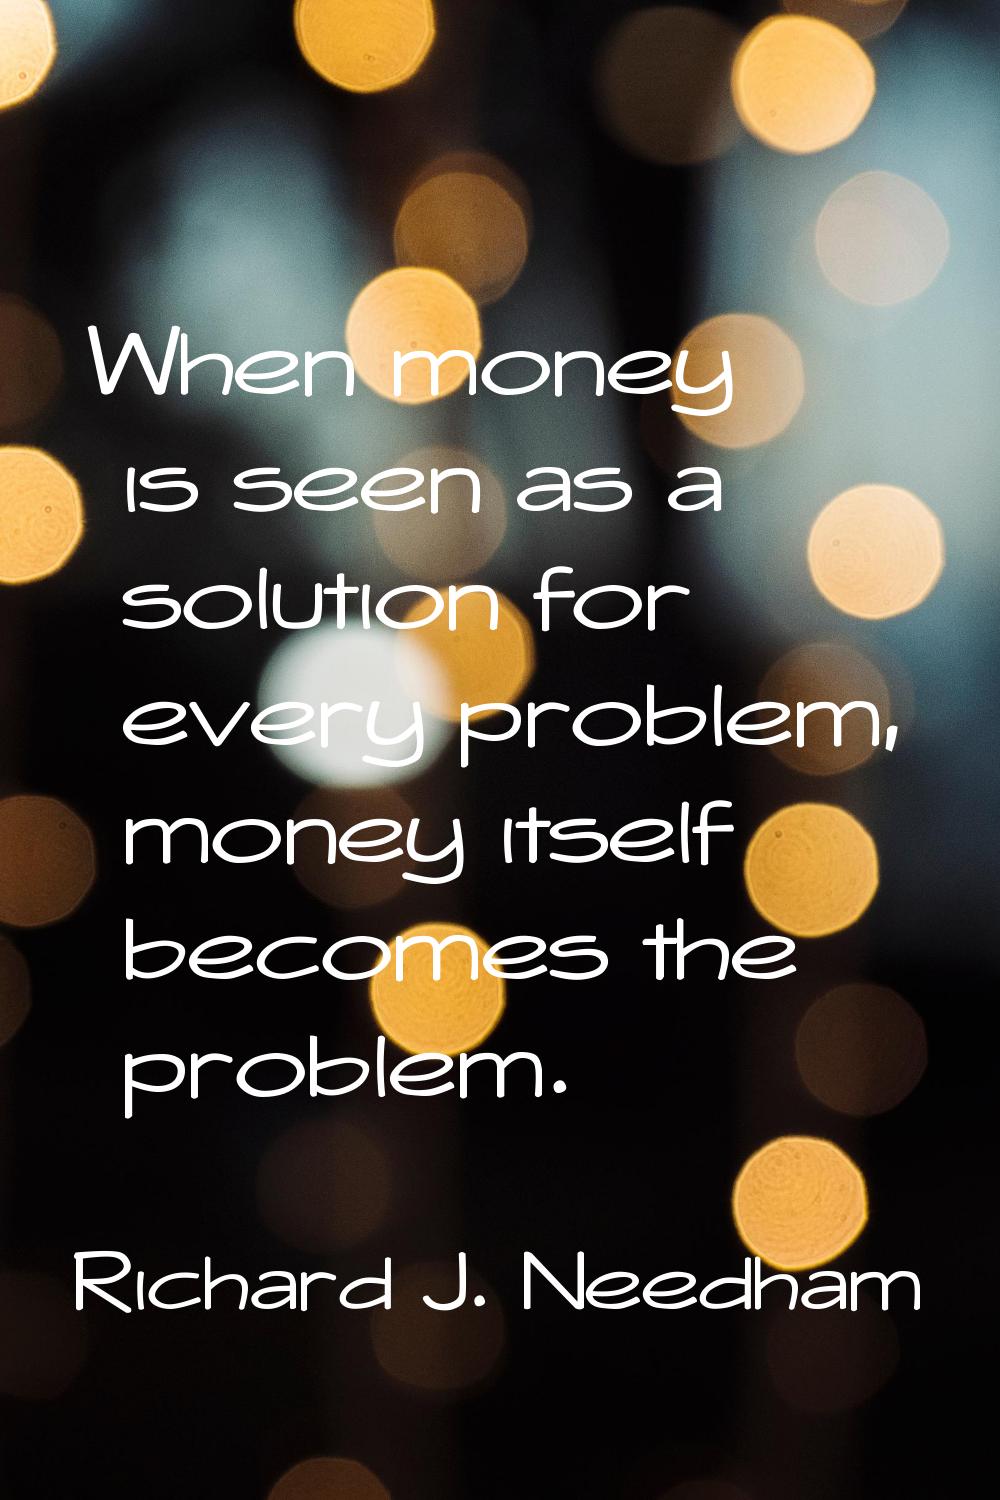 When money is seen as a solution for every problem, money itself becomes the problem.